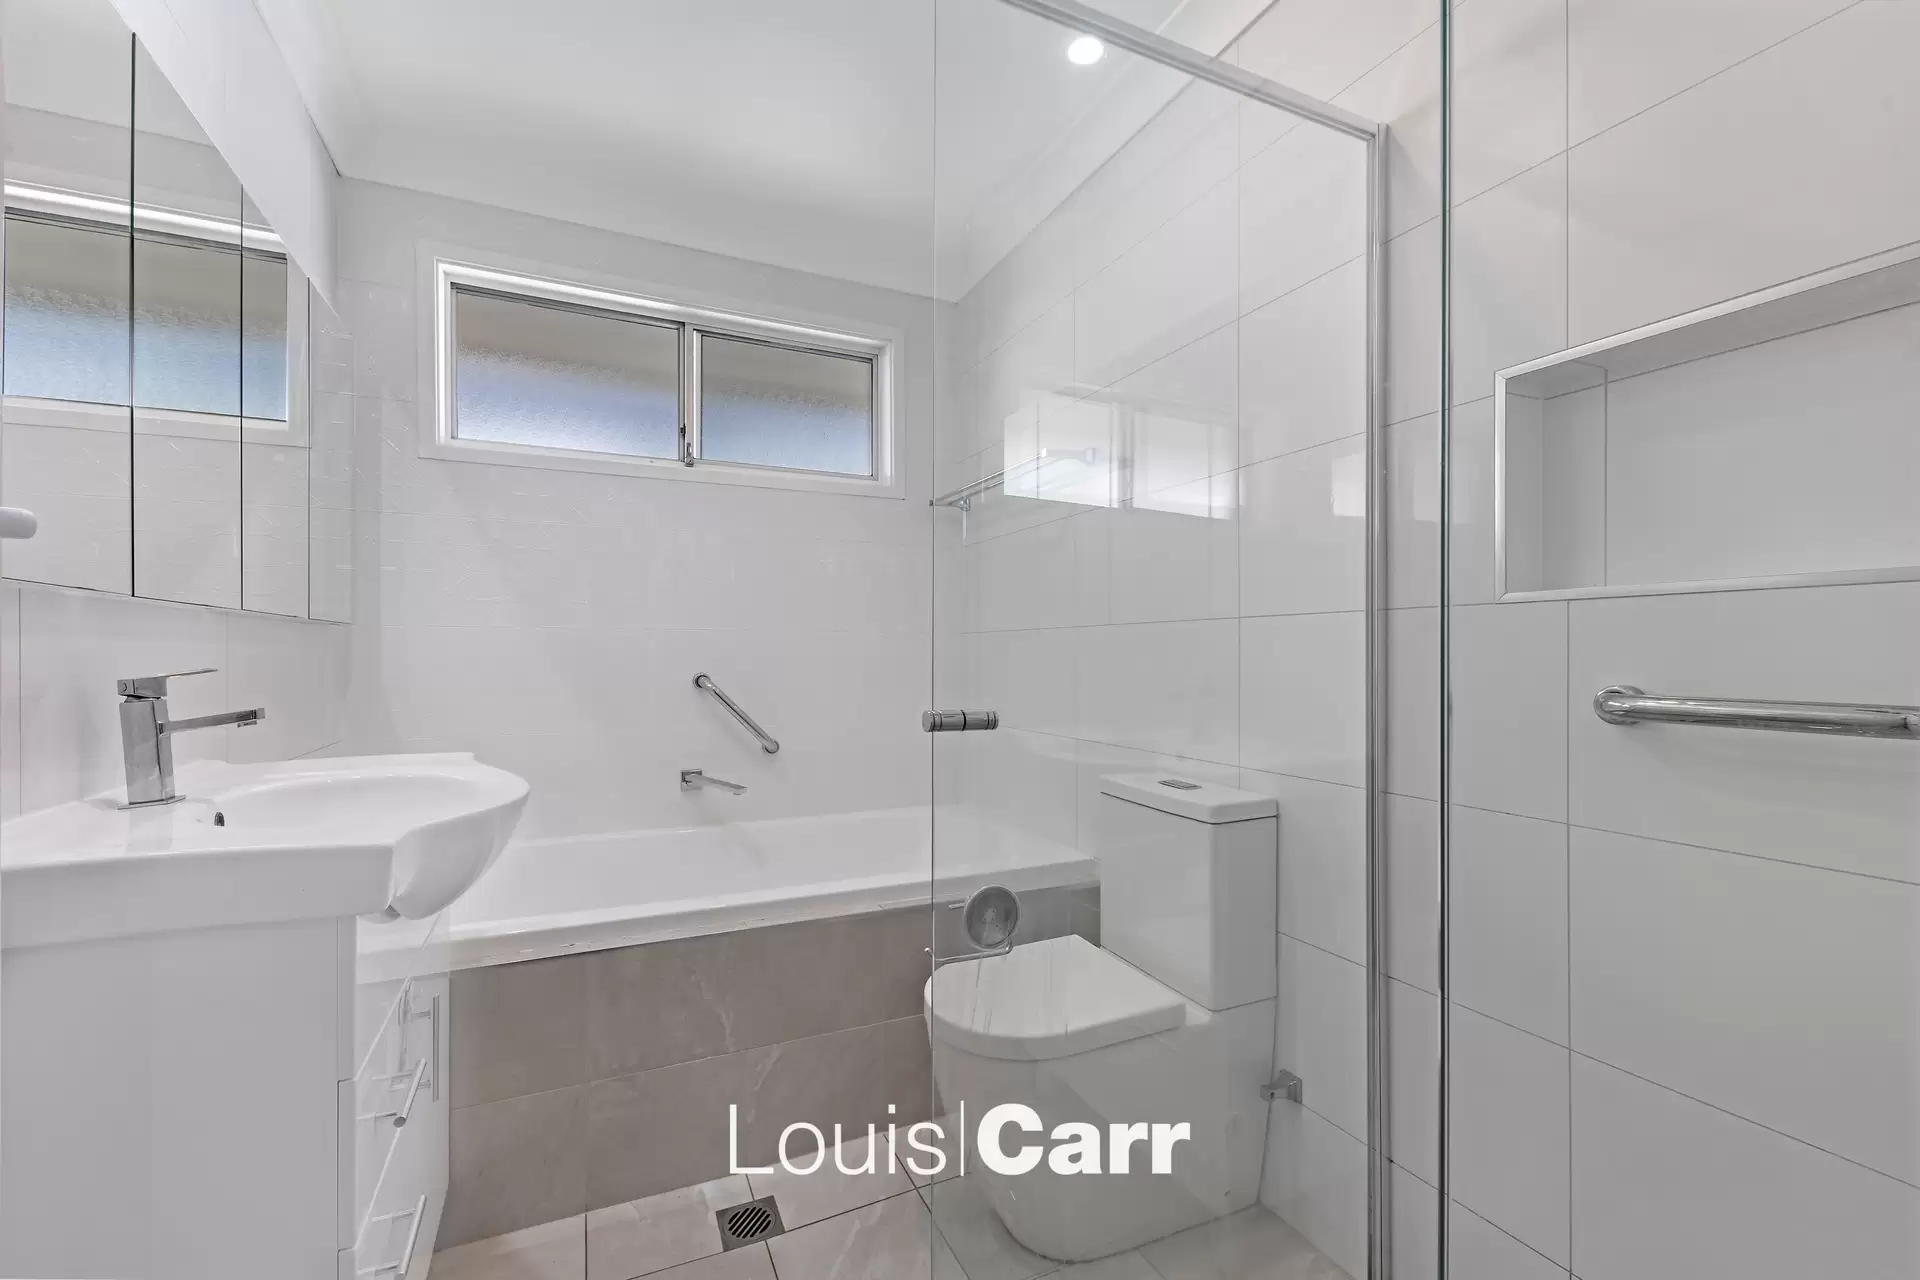 Photo #8: 24 Waninga Road, Hornsby Heights - Leased by Louis Carr Real Estate